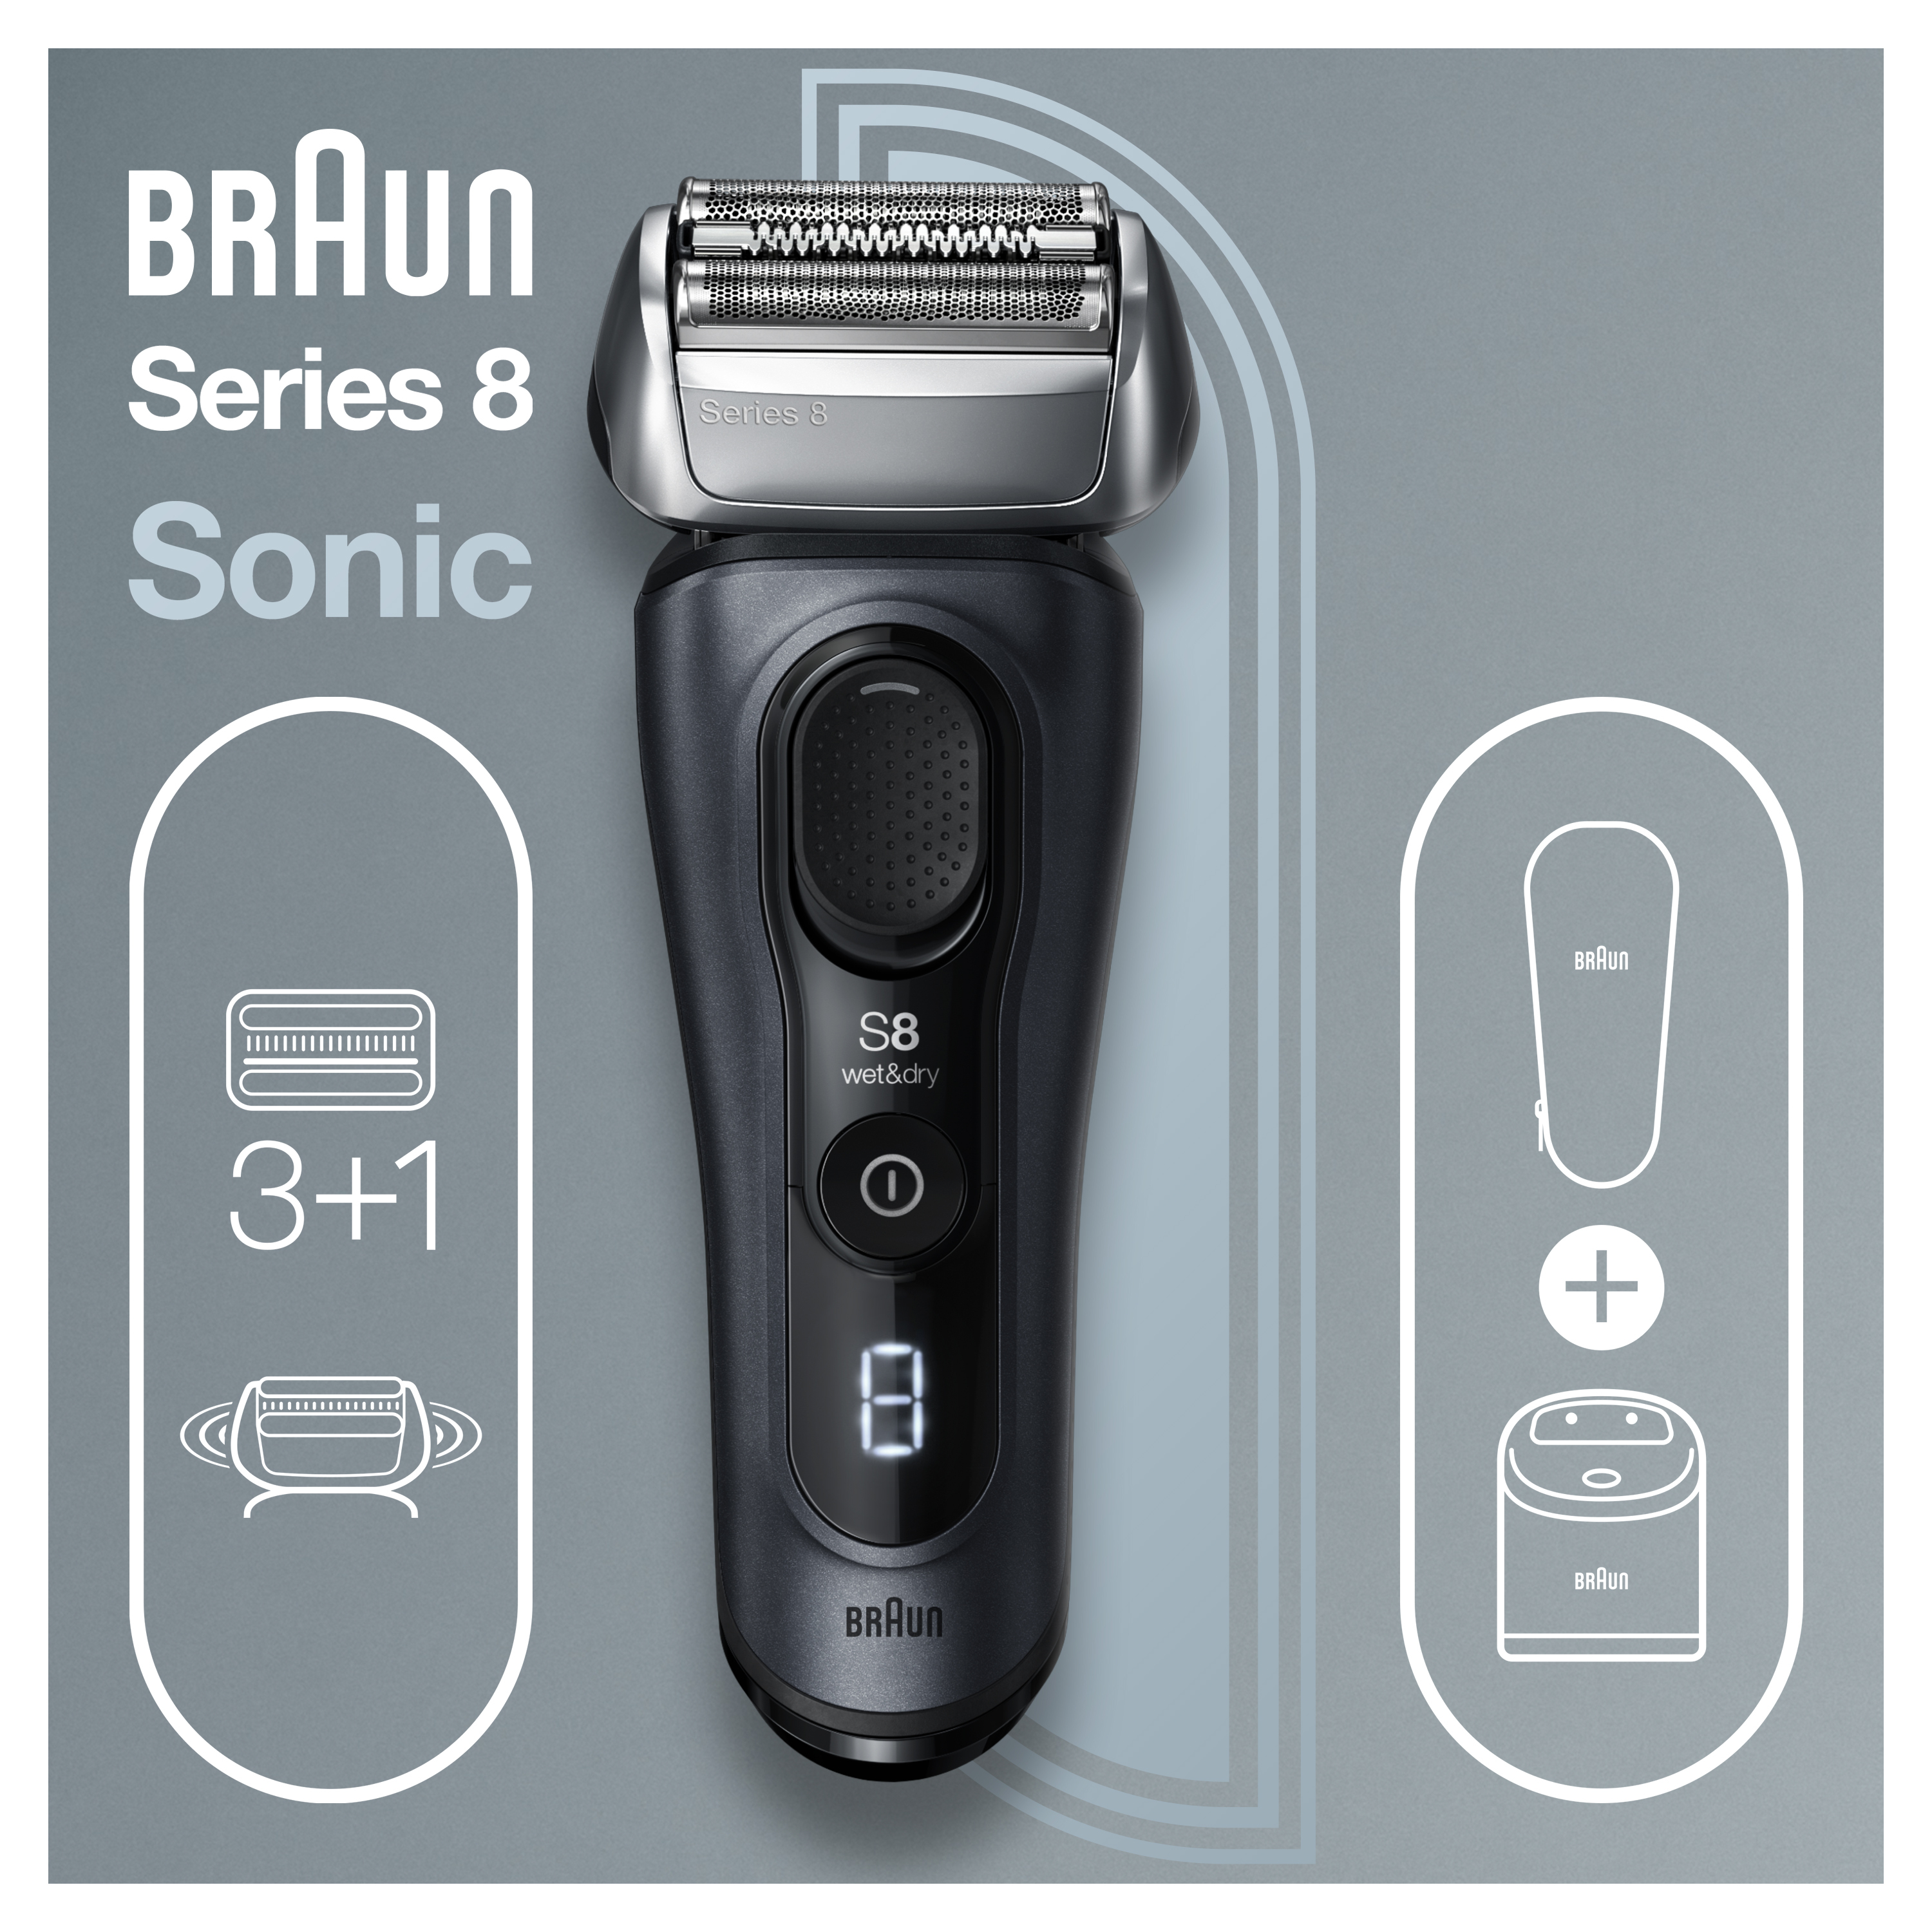 Braun Series 8 8453cc Electric Shaver for Men, 3+1 Head with Precision Trimmer - image 2 of 8